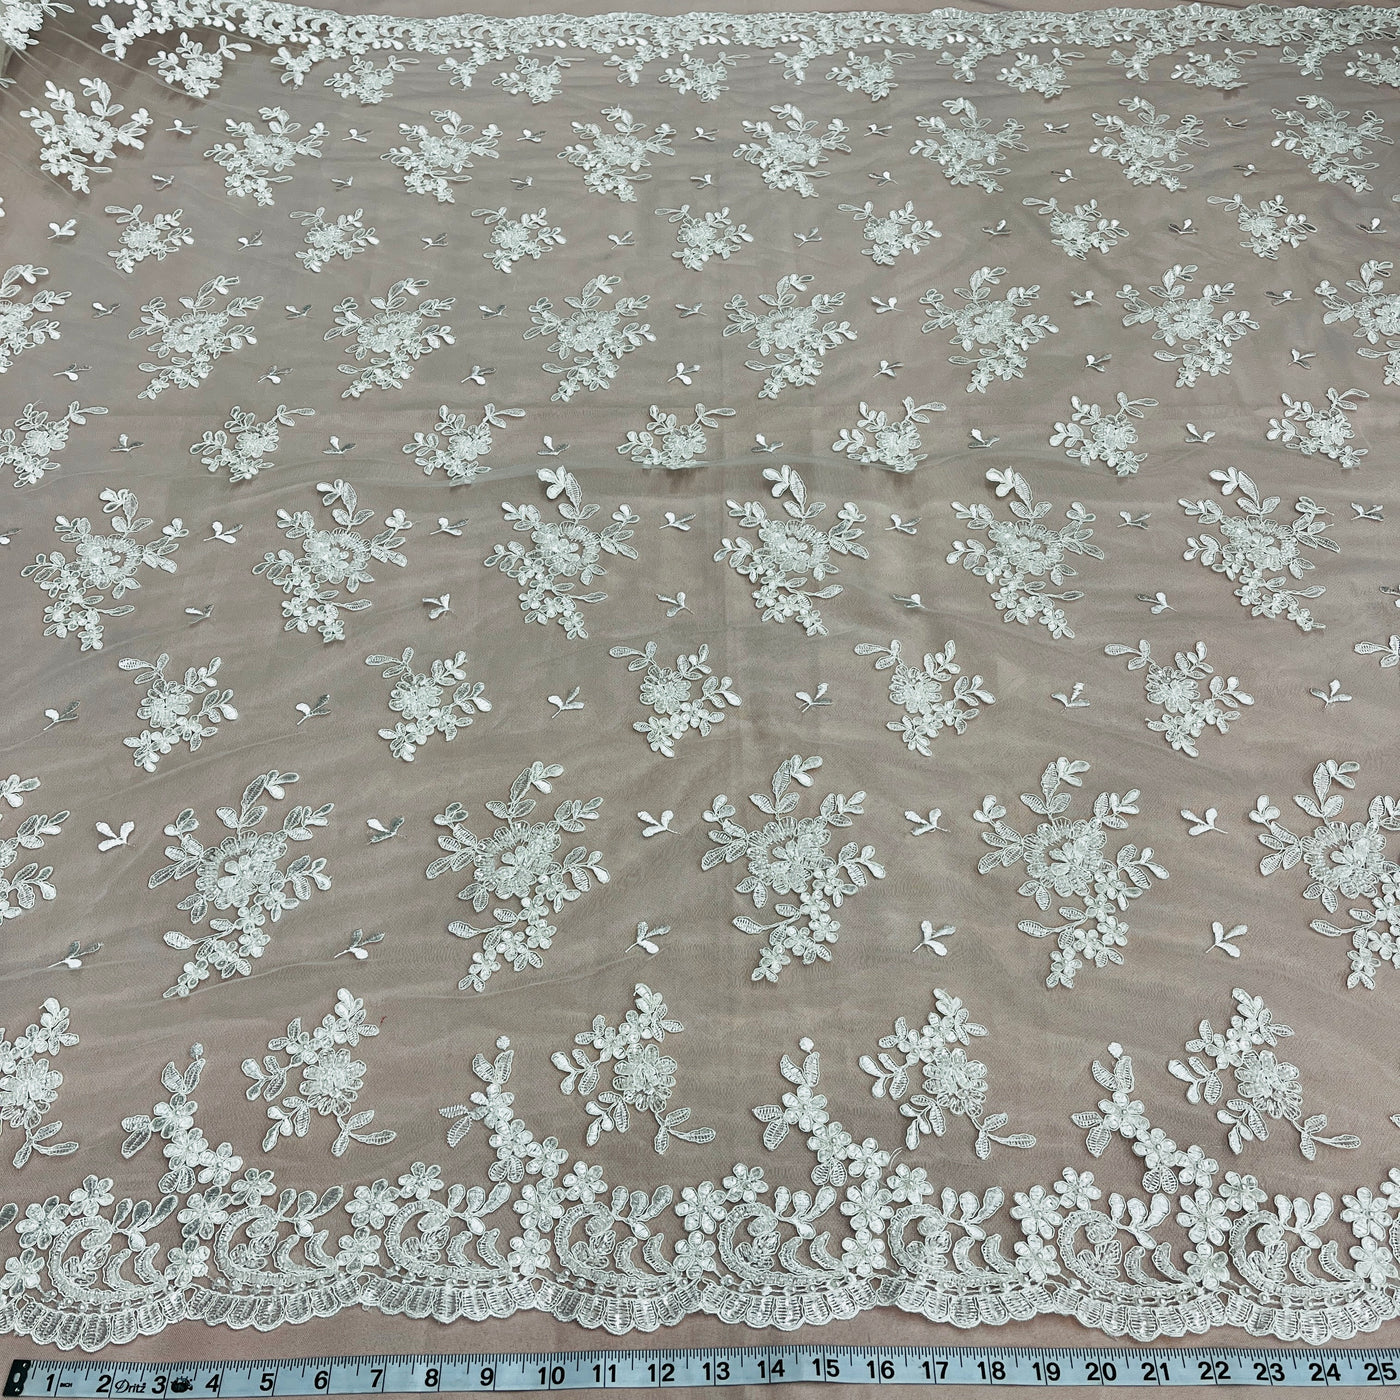 Beaded & Corded Bridal Lace Fabric Embroidered on 100% Polyester Net Mesh | Lace USA - 91436W-HB